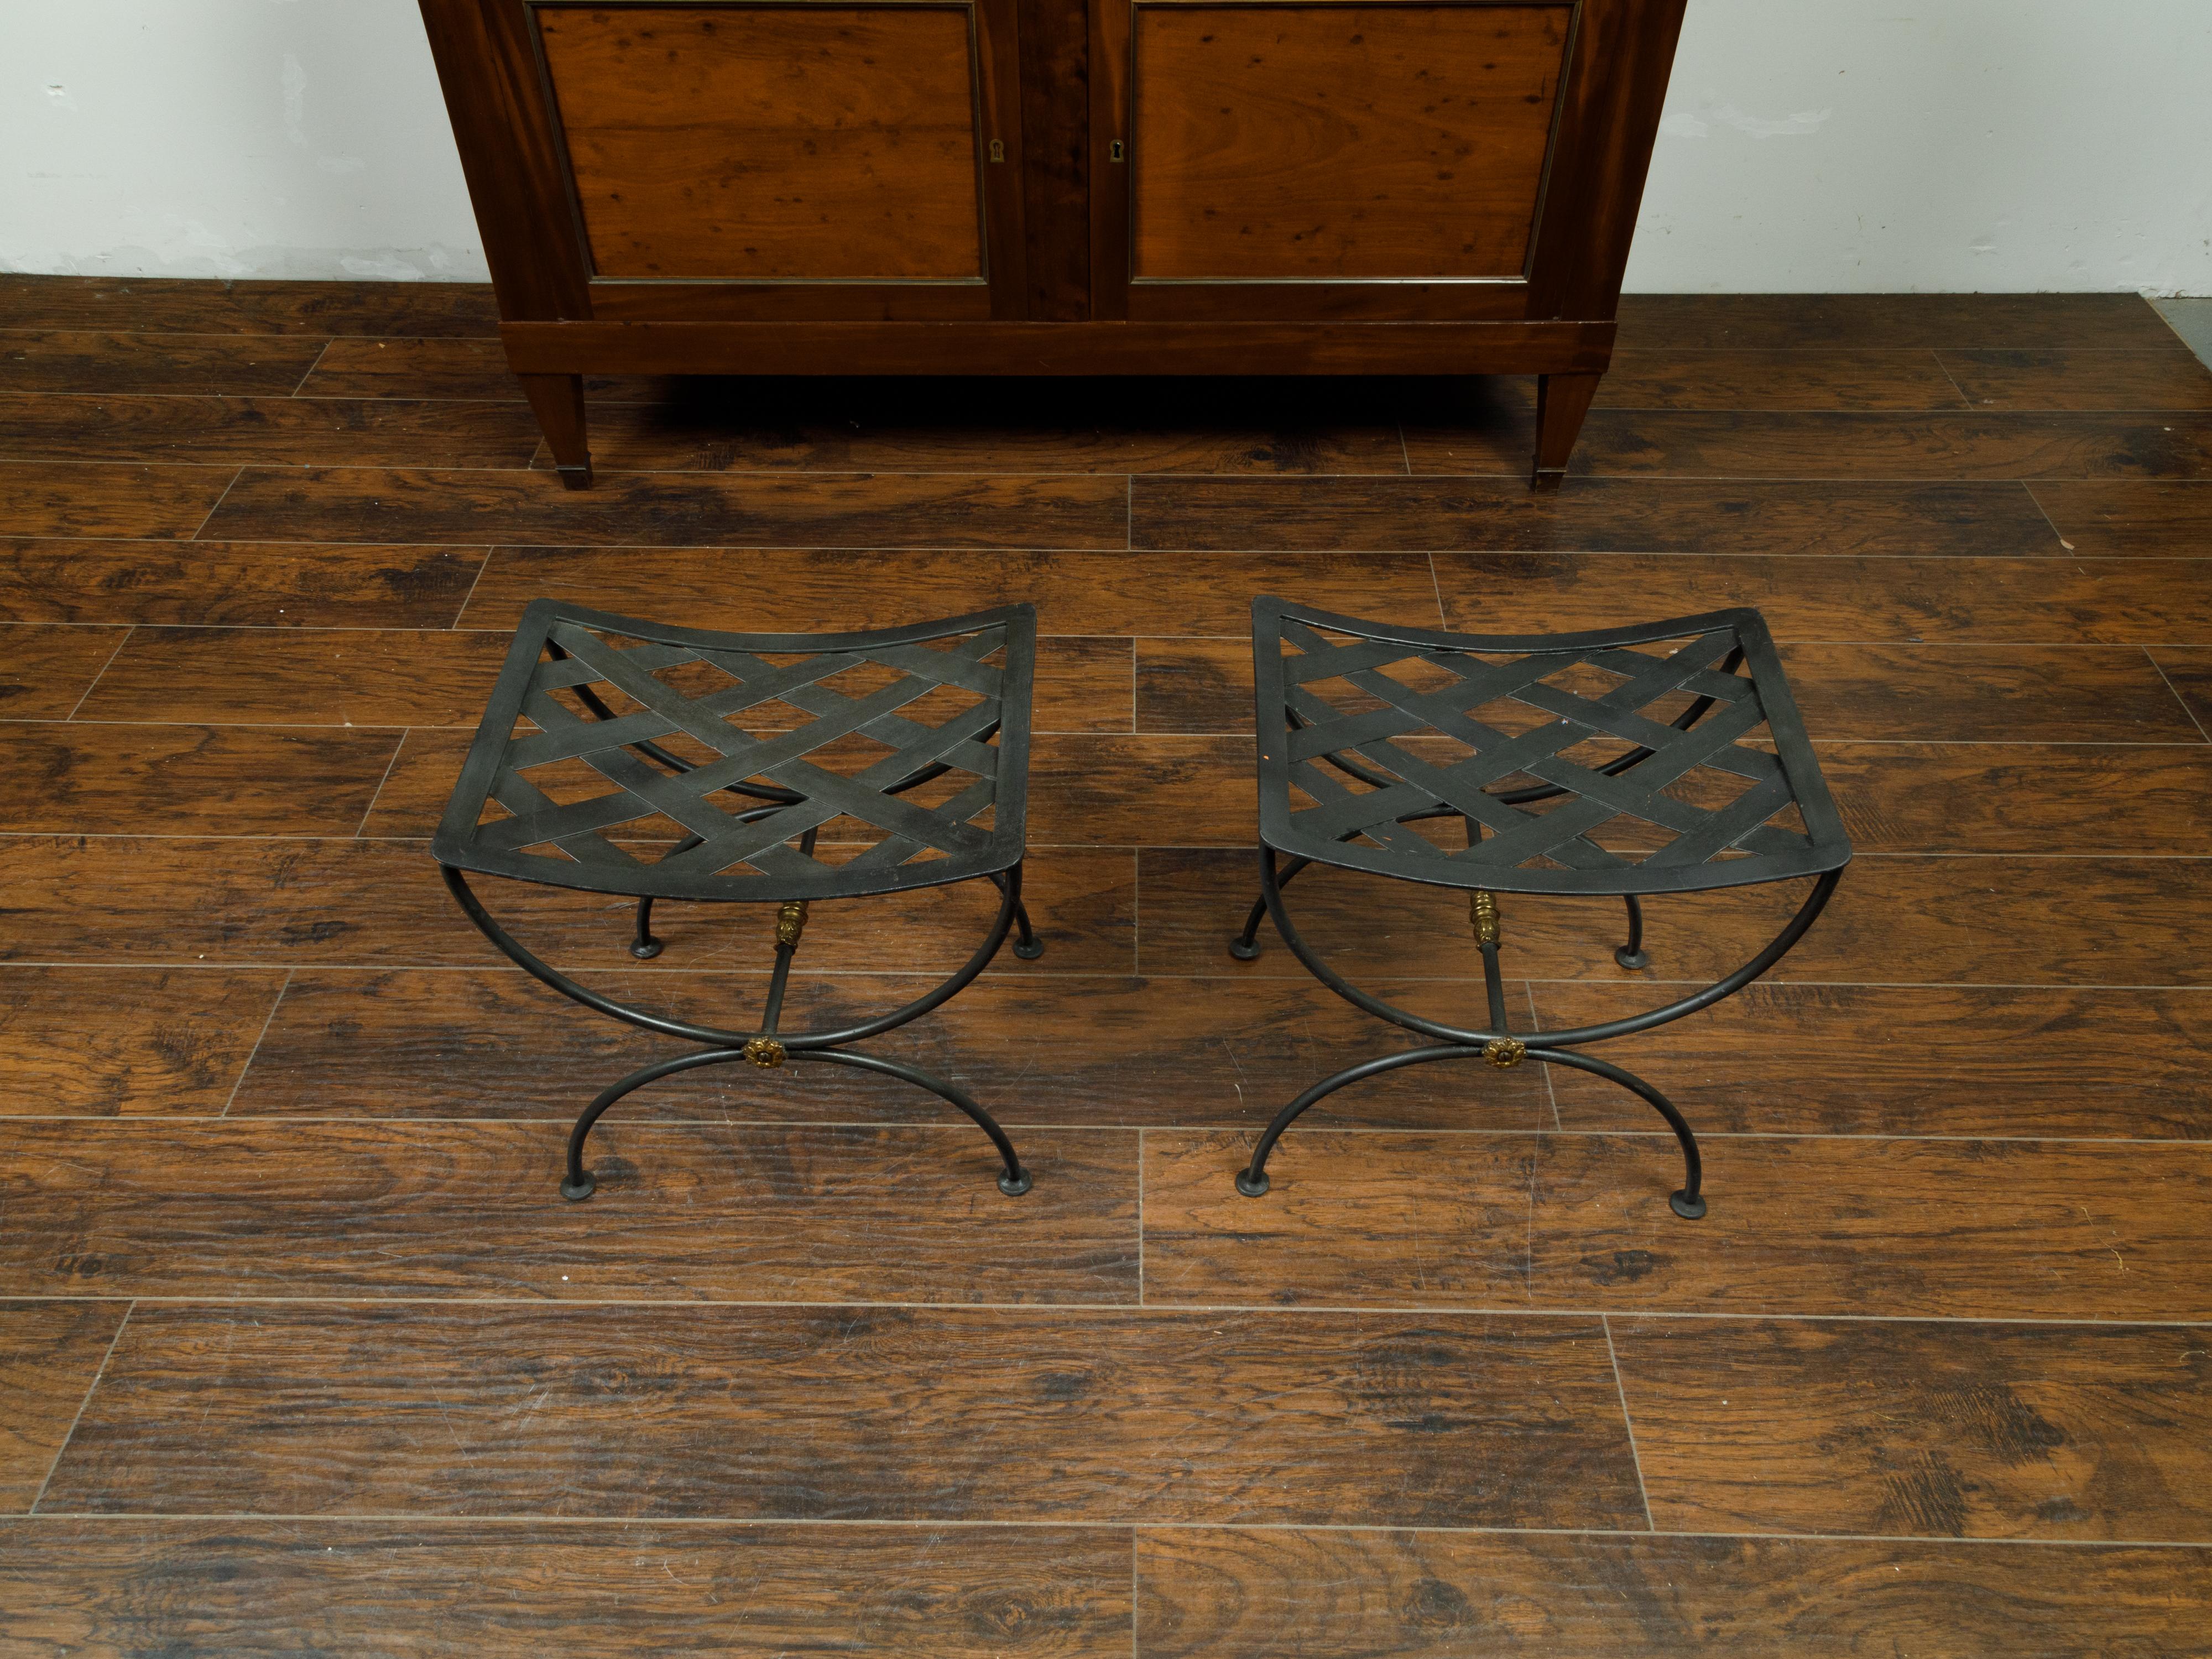 20th Century Pair of French Midcentury Iron Curule Stools with Latticed Tops and X-Form Bases